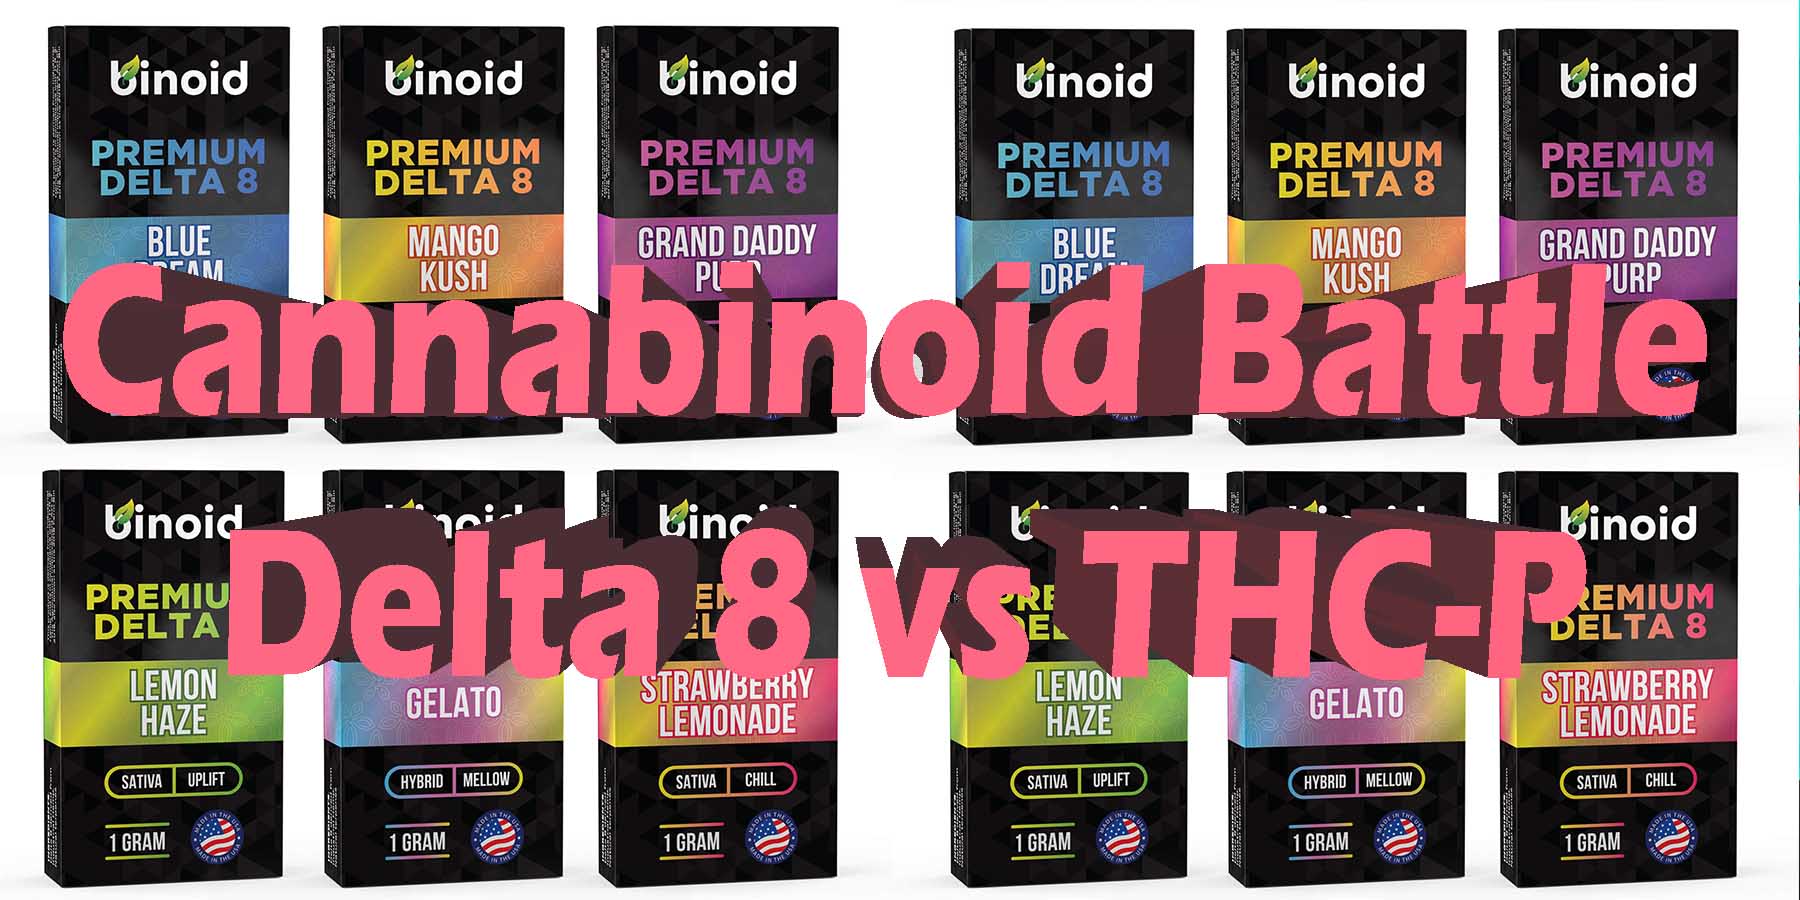 Cannabinoid Battle Delta 8 vs Thc-p WhereToGet HowToGetNearMe BestPlace LowestPrice Coupon Discount For Smoking Best High Smoke Shop Online Near Me Strongest Binoid